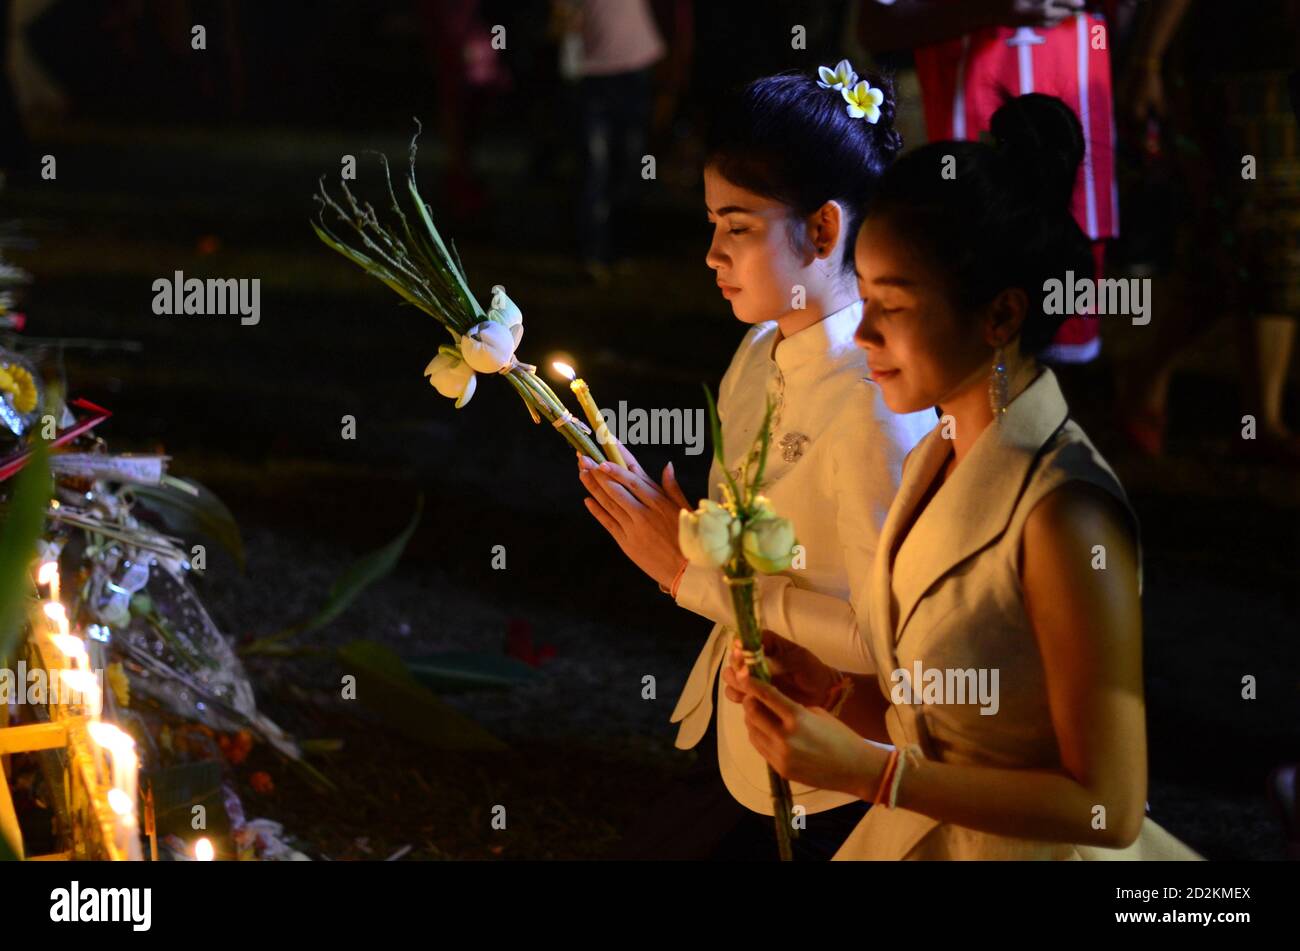 Vientiane, Laos. 3rd Nov, 2017. Two Lao girls pray before the That Luang Stupa in Vientiane, Laos, on Nov. 3, 2017. Laos is the only landlocked country in Southeast Asia. In the central part of the country, the capital Vientiane is located on the alluvial plain on the Mekong River, suitable for fishing and plantation. The Lan Xang Kingdom, the first unified multi-ethnic nation in the history of Laos, moved its capital to Vientiane in the mid-16th century, and Vientiane gradually prospered. Credit: Alan Liu/Xinhua/Alamy Live News Stock Photo